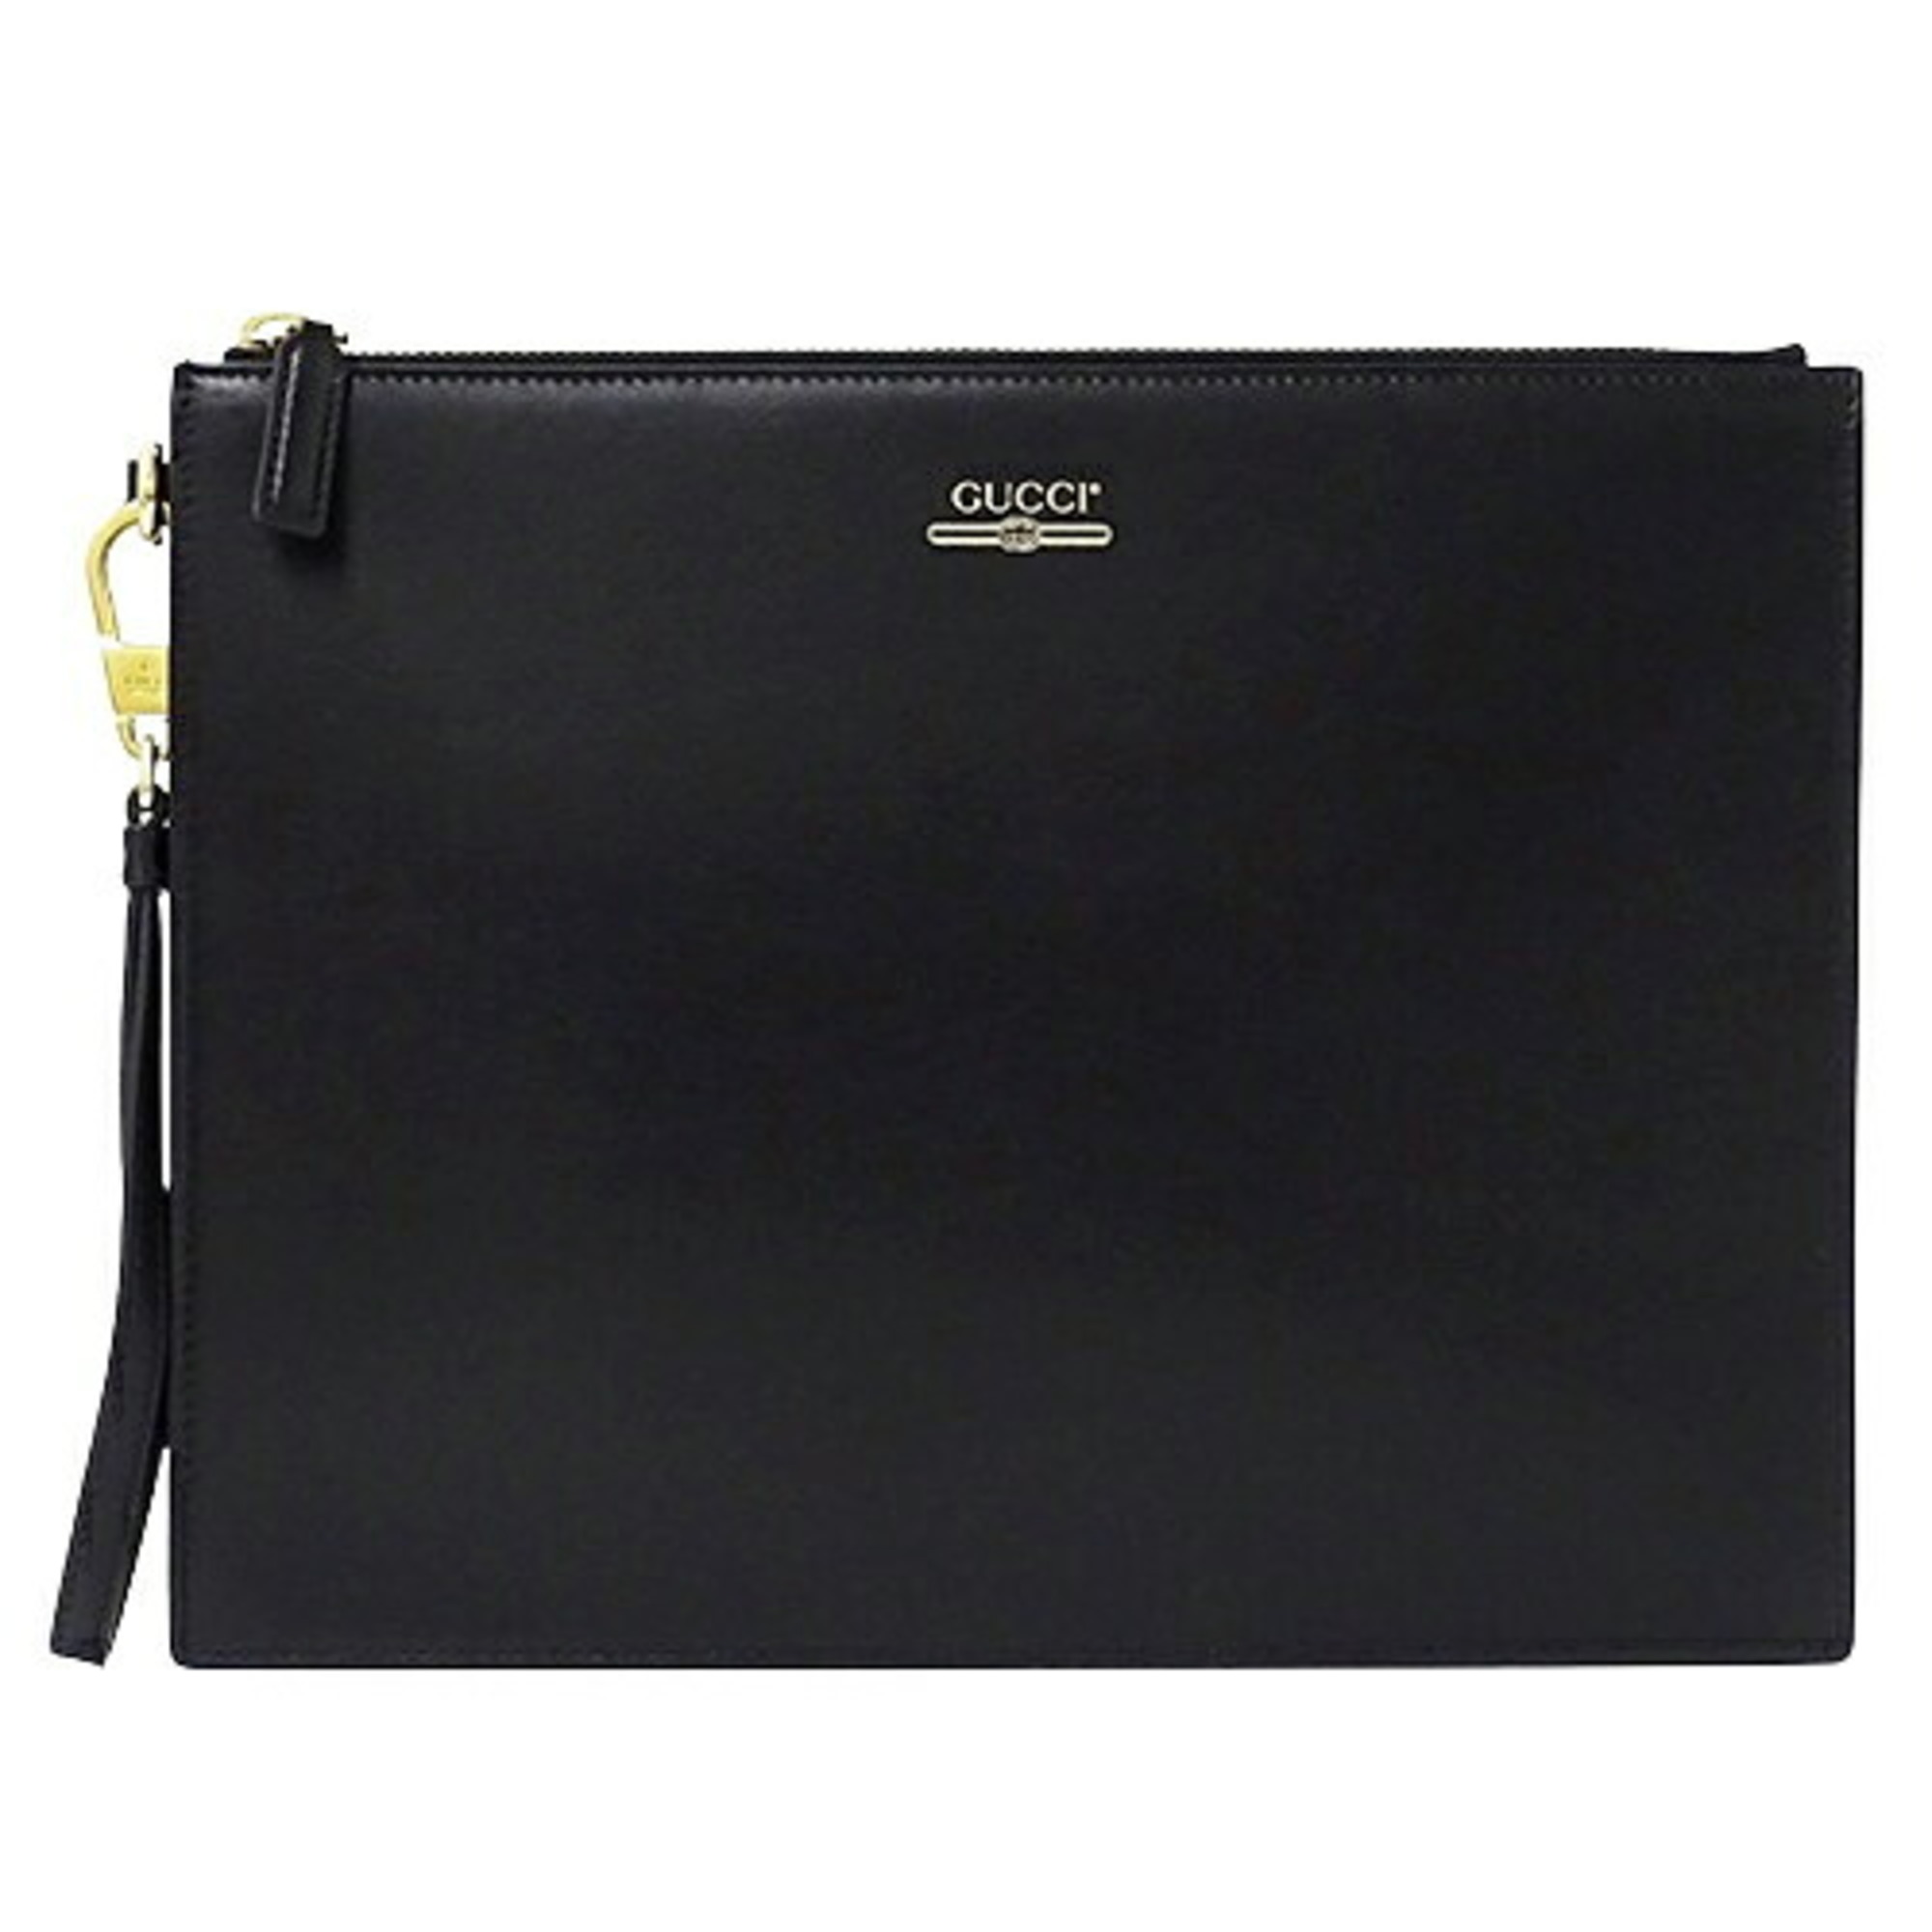 GUCCI Bag Women's Clutch Second Leather Black 547613 Compact